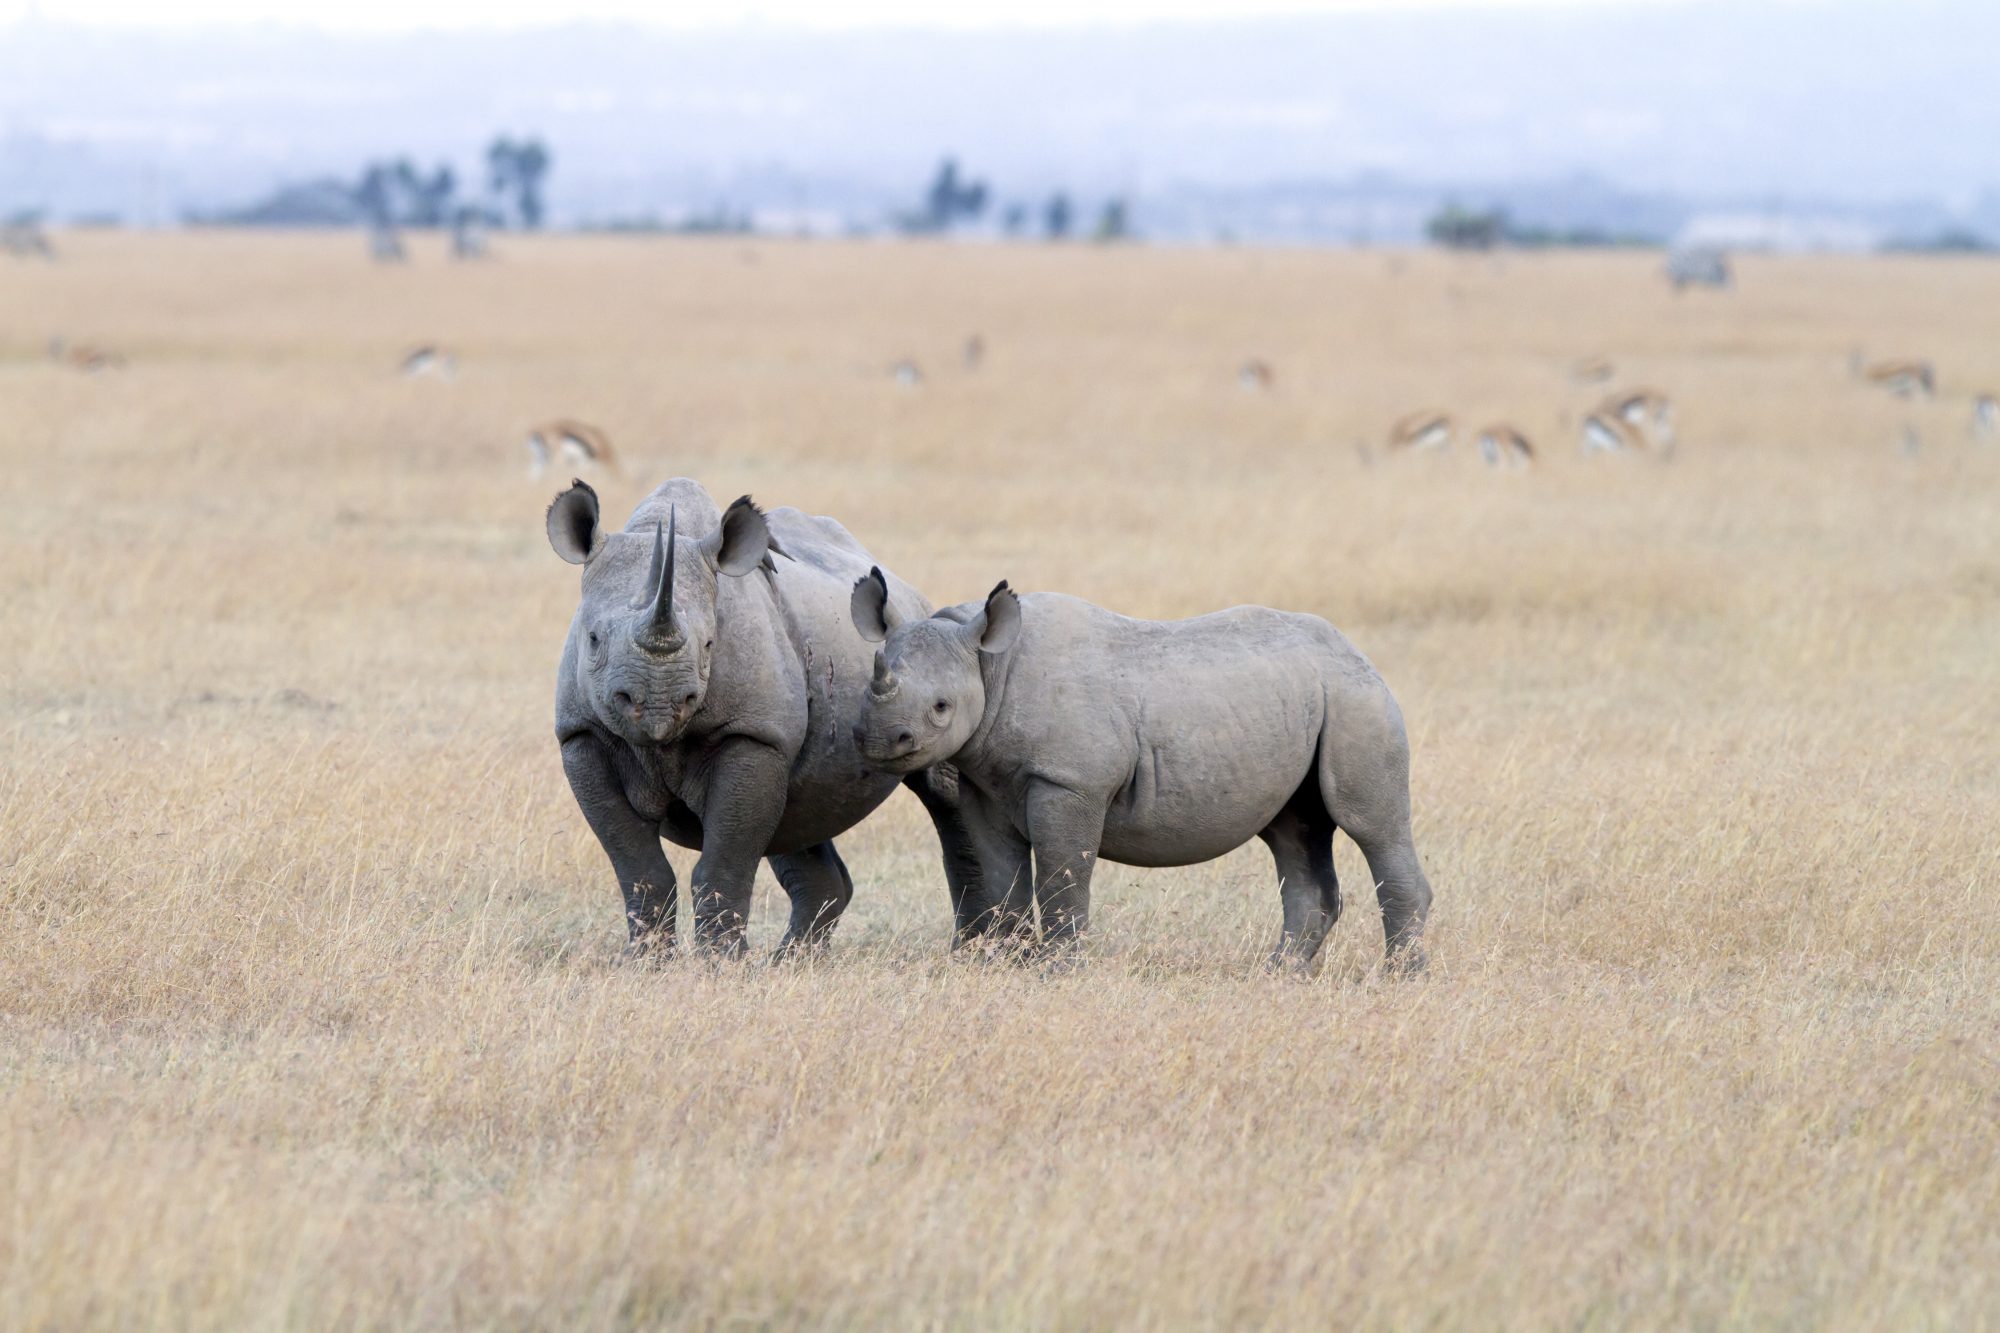 "Black Rhinoceros with young one, short before sunset, Sweetwaters, Kenya"